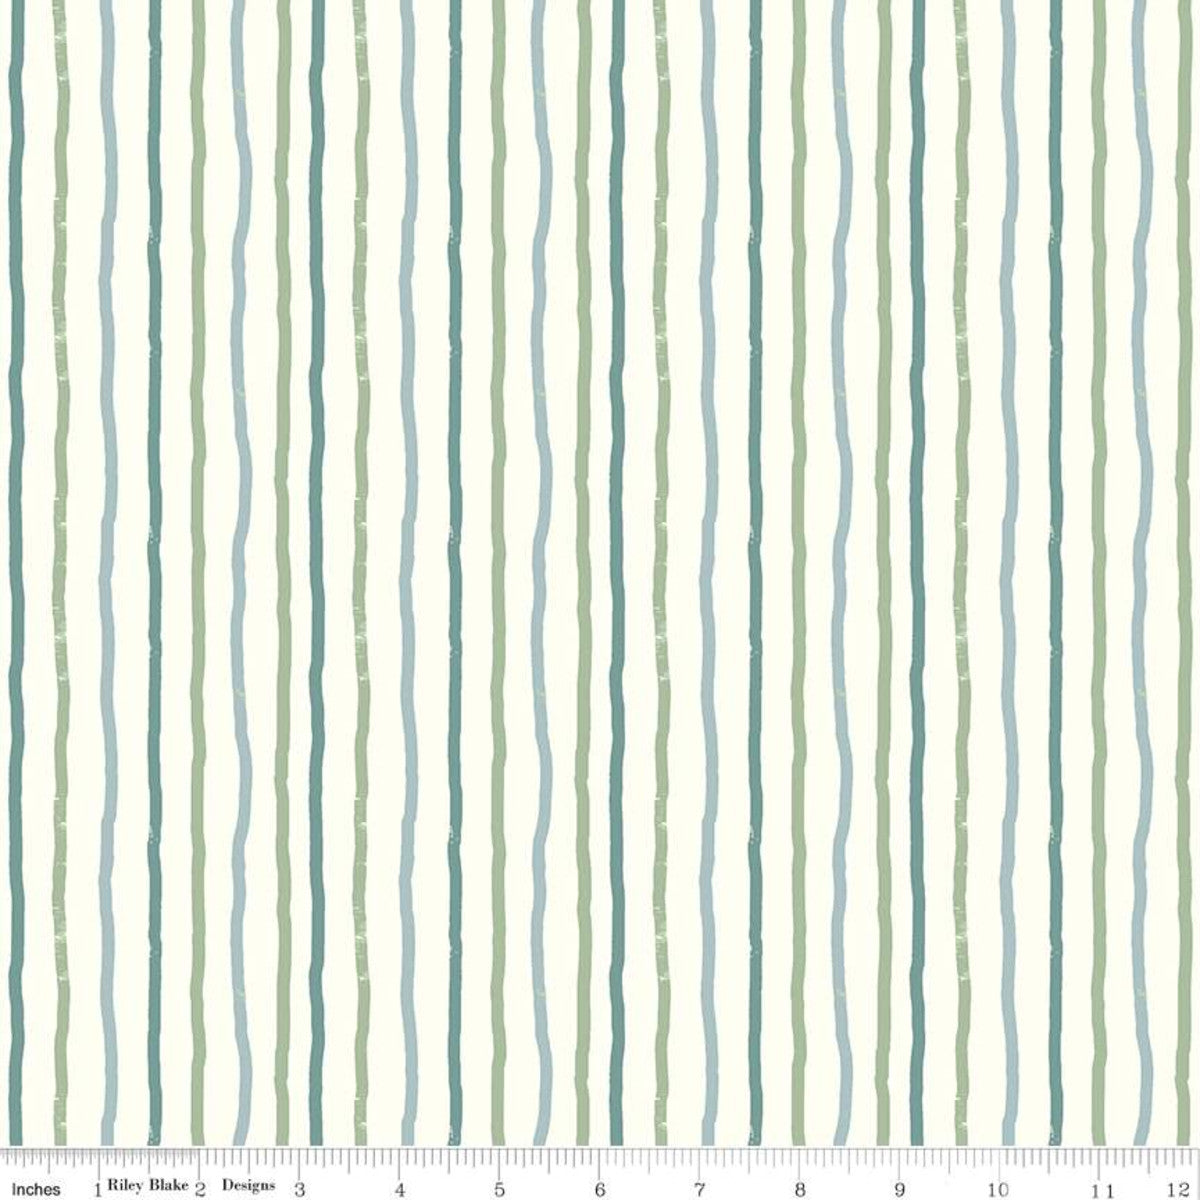 Stripes on Cream from the Roar collection by Citrus and Mint for Riley Blake Designs cream background with irregular teal slate blue and olive green stripes in slate blue gray high quality quilting weight fabric for quilts bags sewing projects clothing garments binding